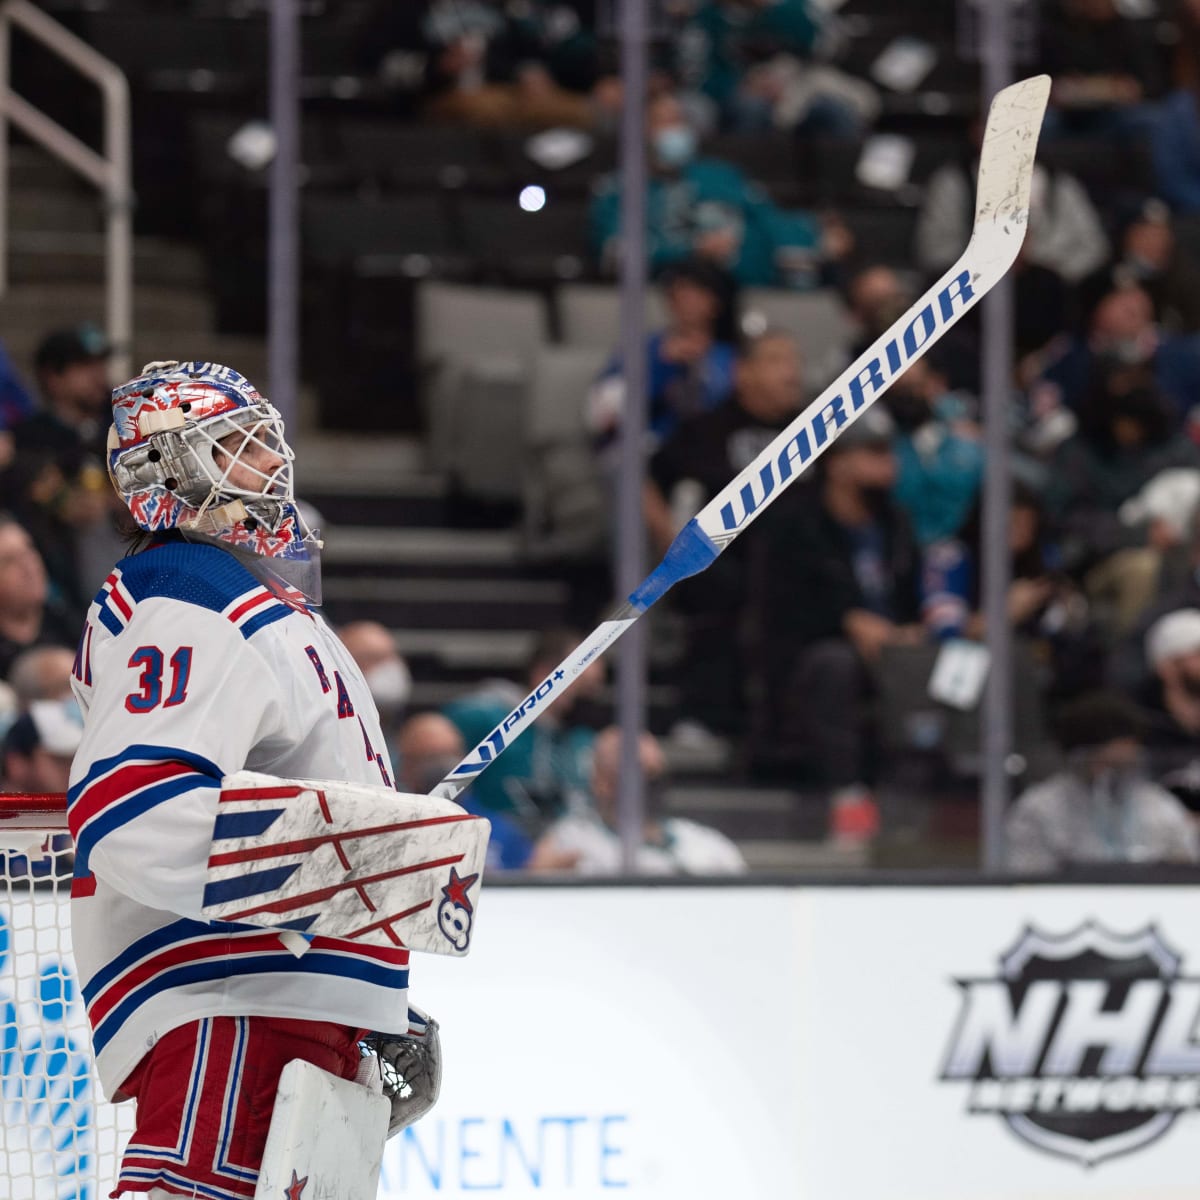 New York Rangers defenseman Adam Fox (23) reacts after missing a shot on  goal during the second period of an NHL hockey game against the Anaheim  Ducks, Tuesday, March 15, 2022, in